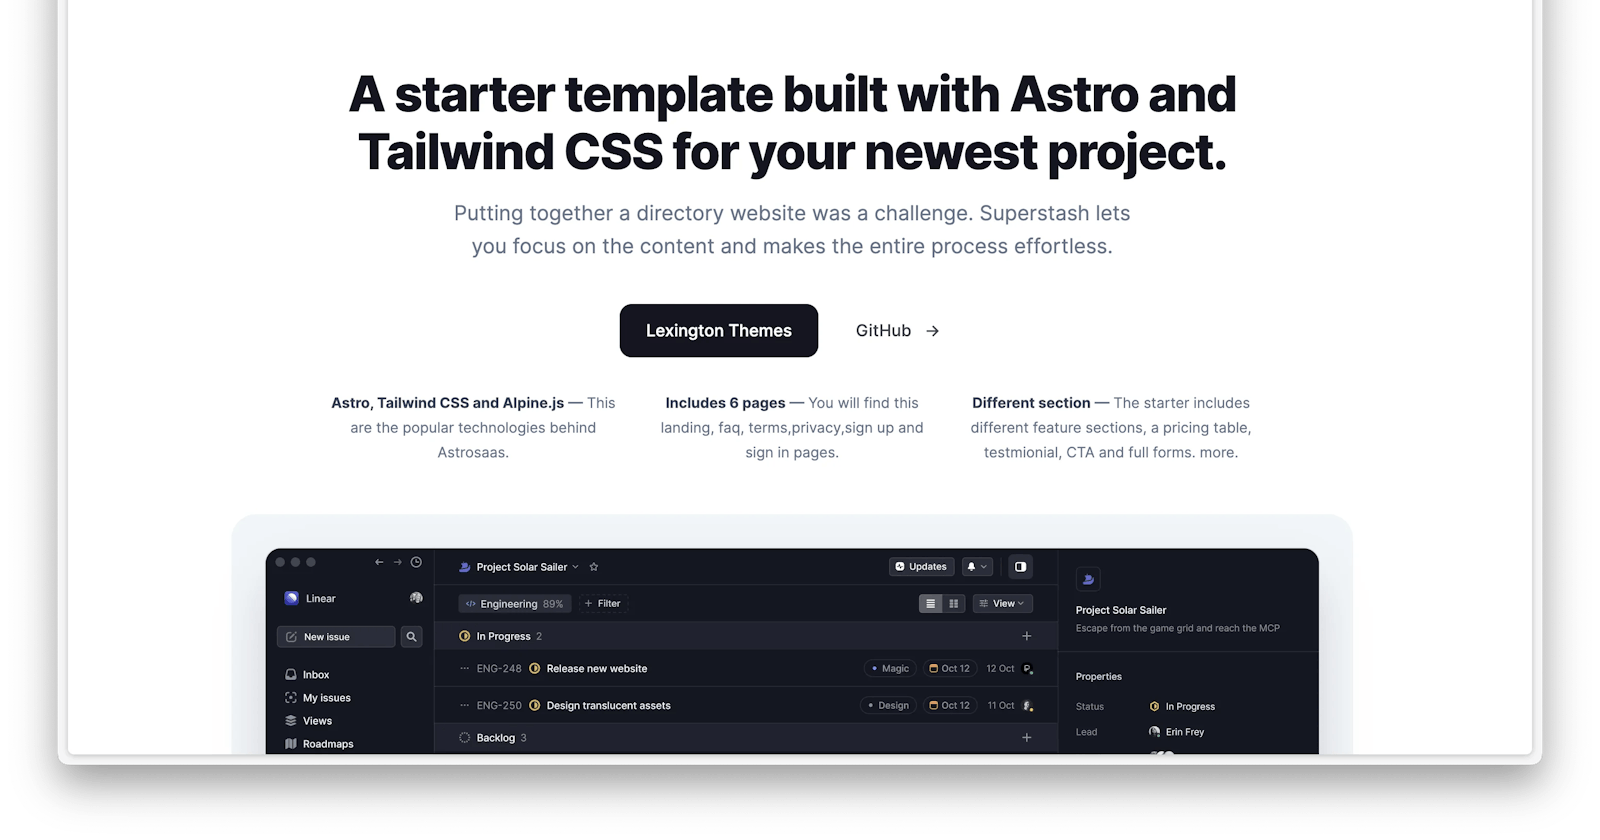 I made a free template with Astro and Tailwind CSS for your next project!